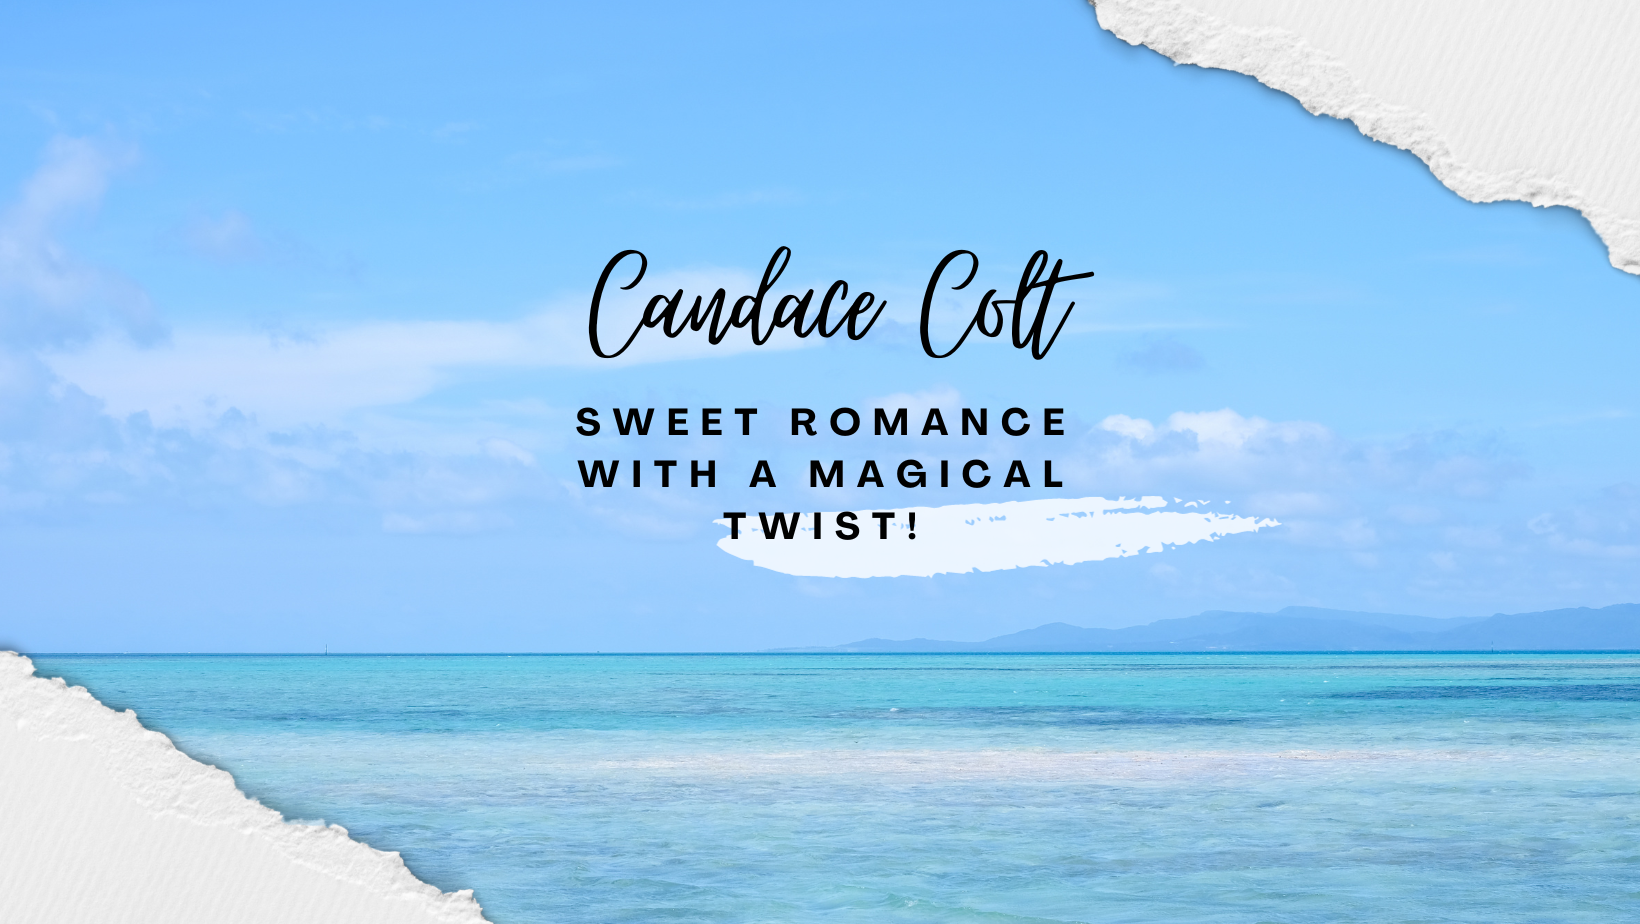 Candace Colt writes sweet romance with a magical twist